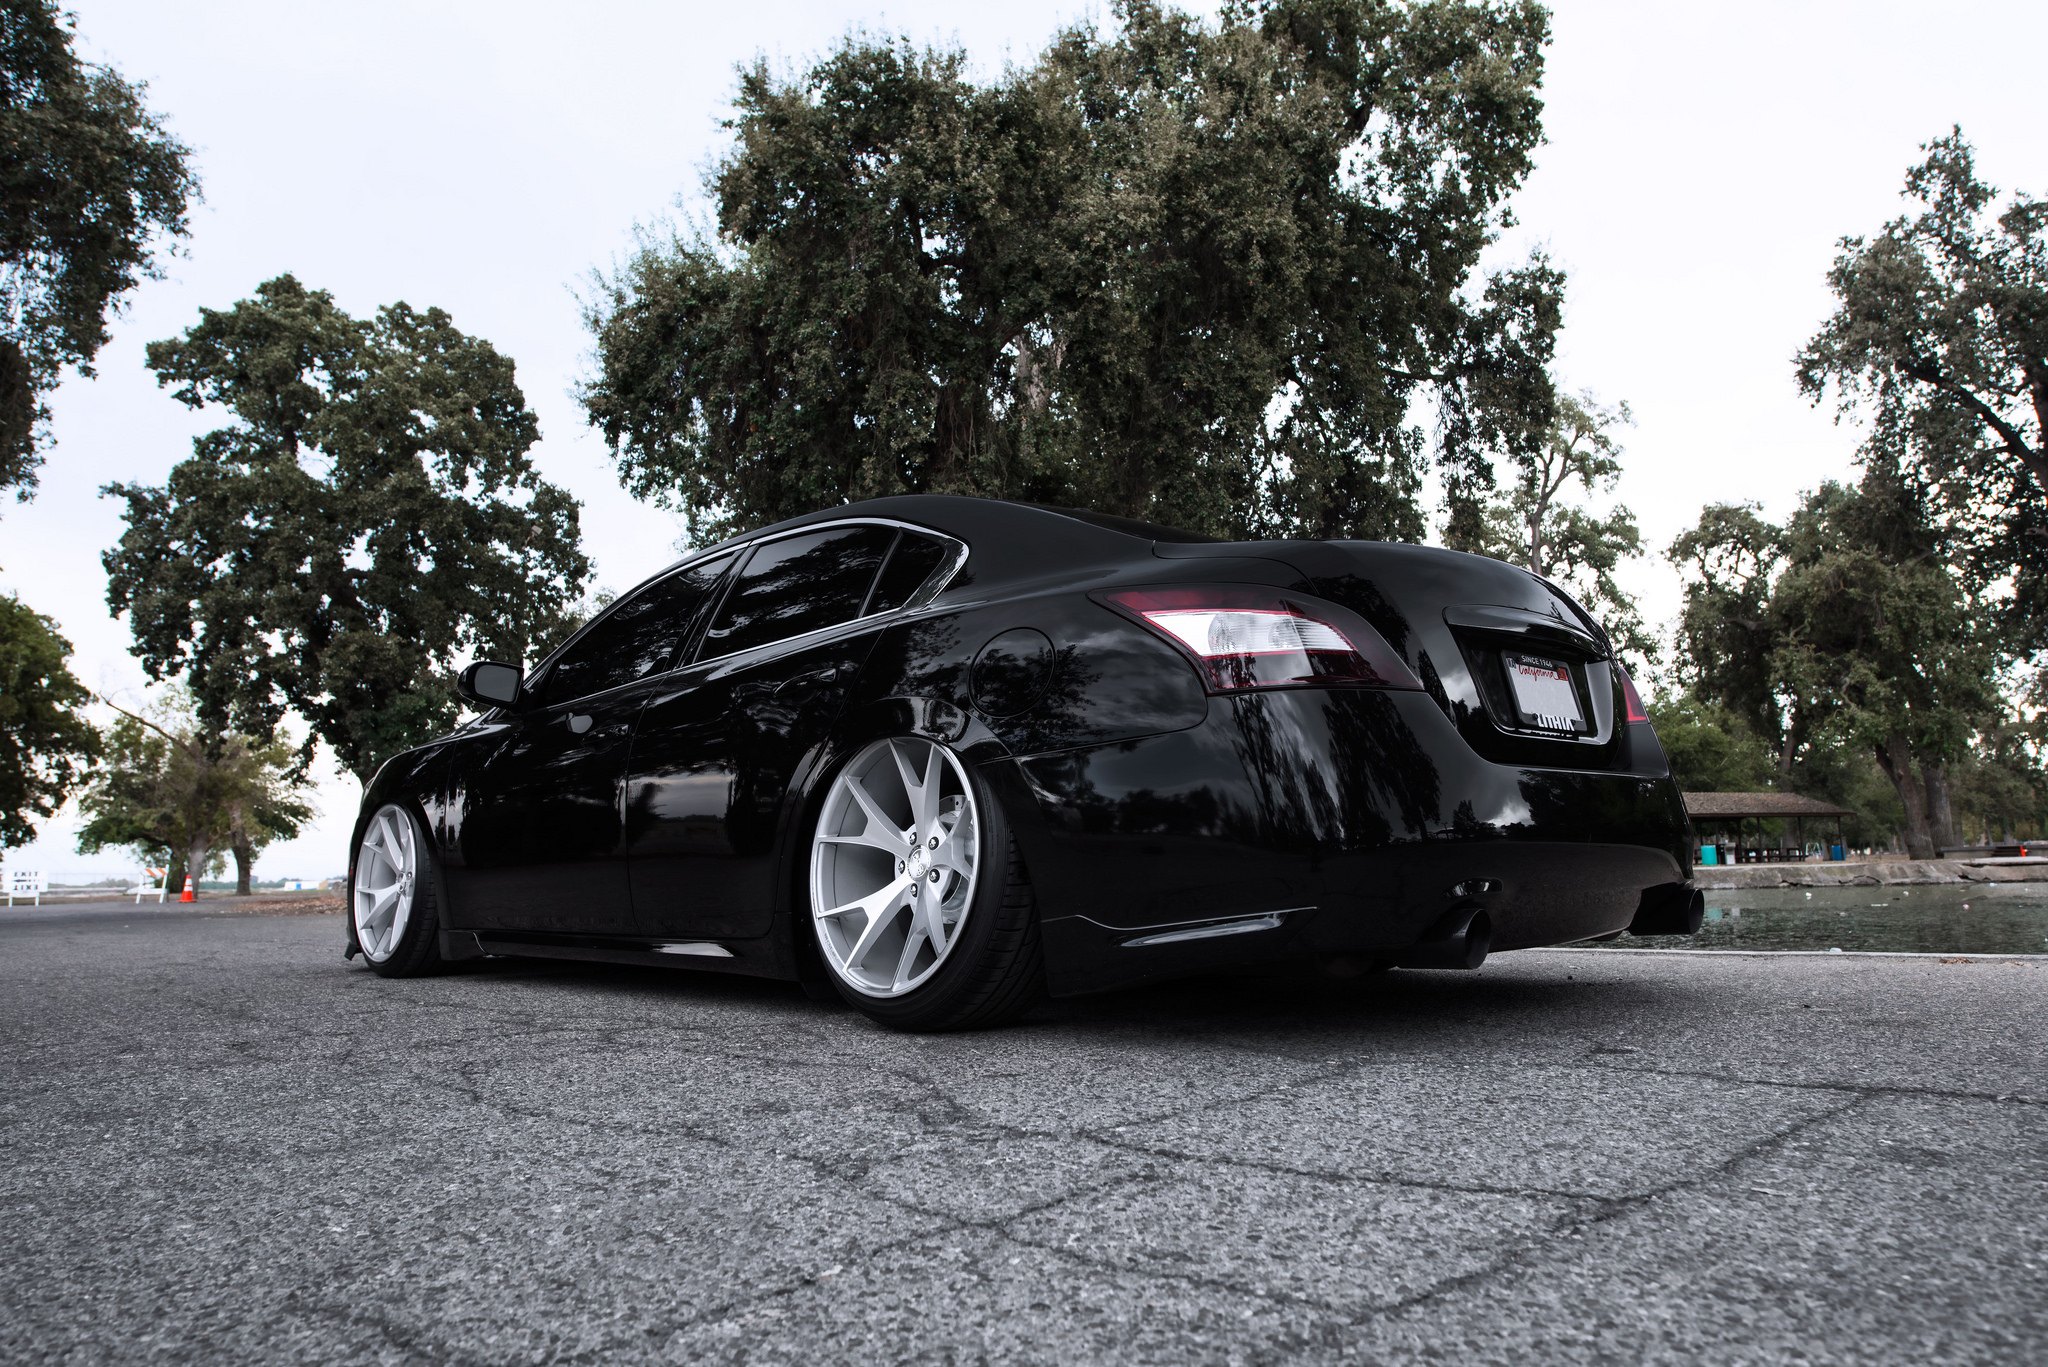 Aftermarket Side Skirts on Black Nissan Maxima - Photo by Concept One